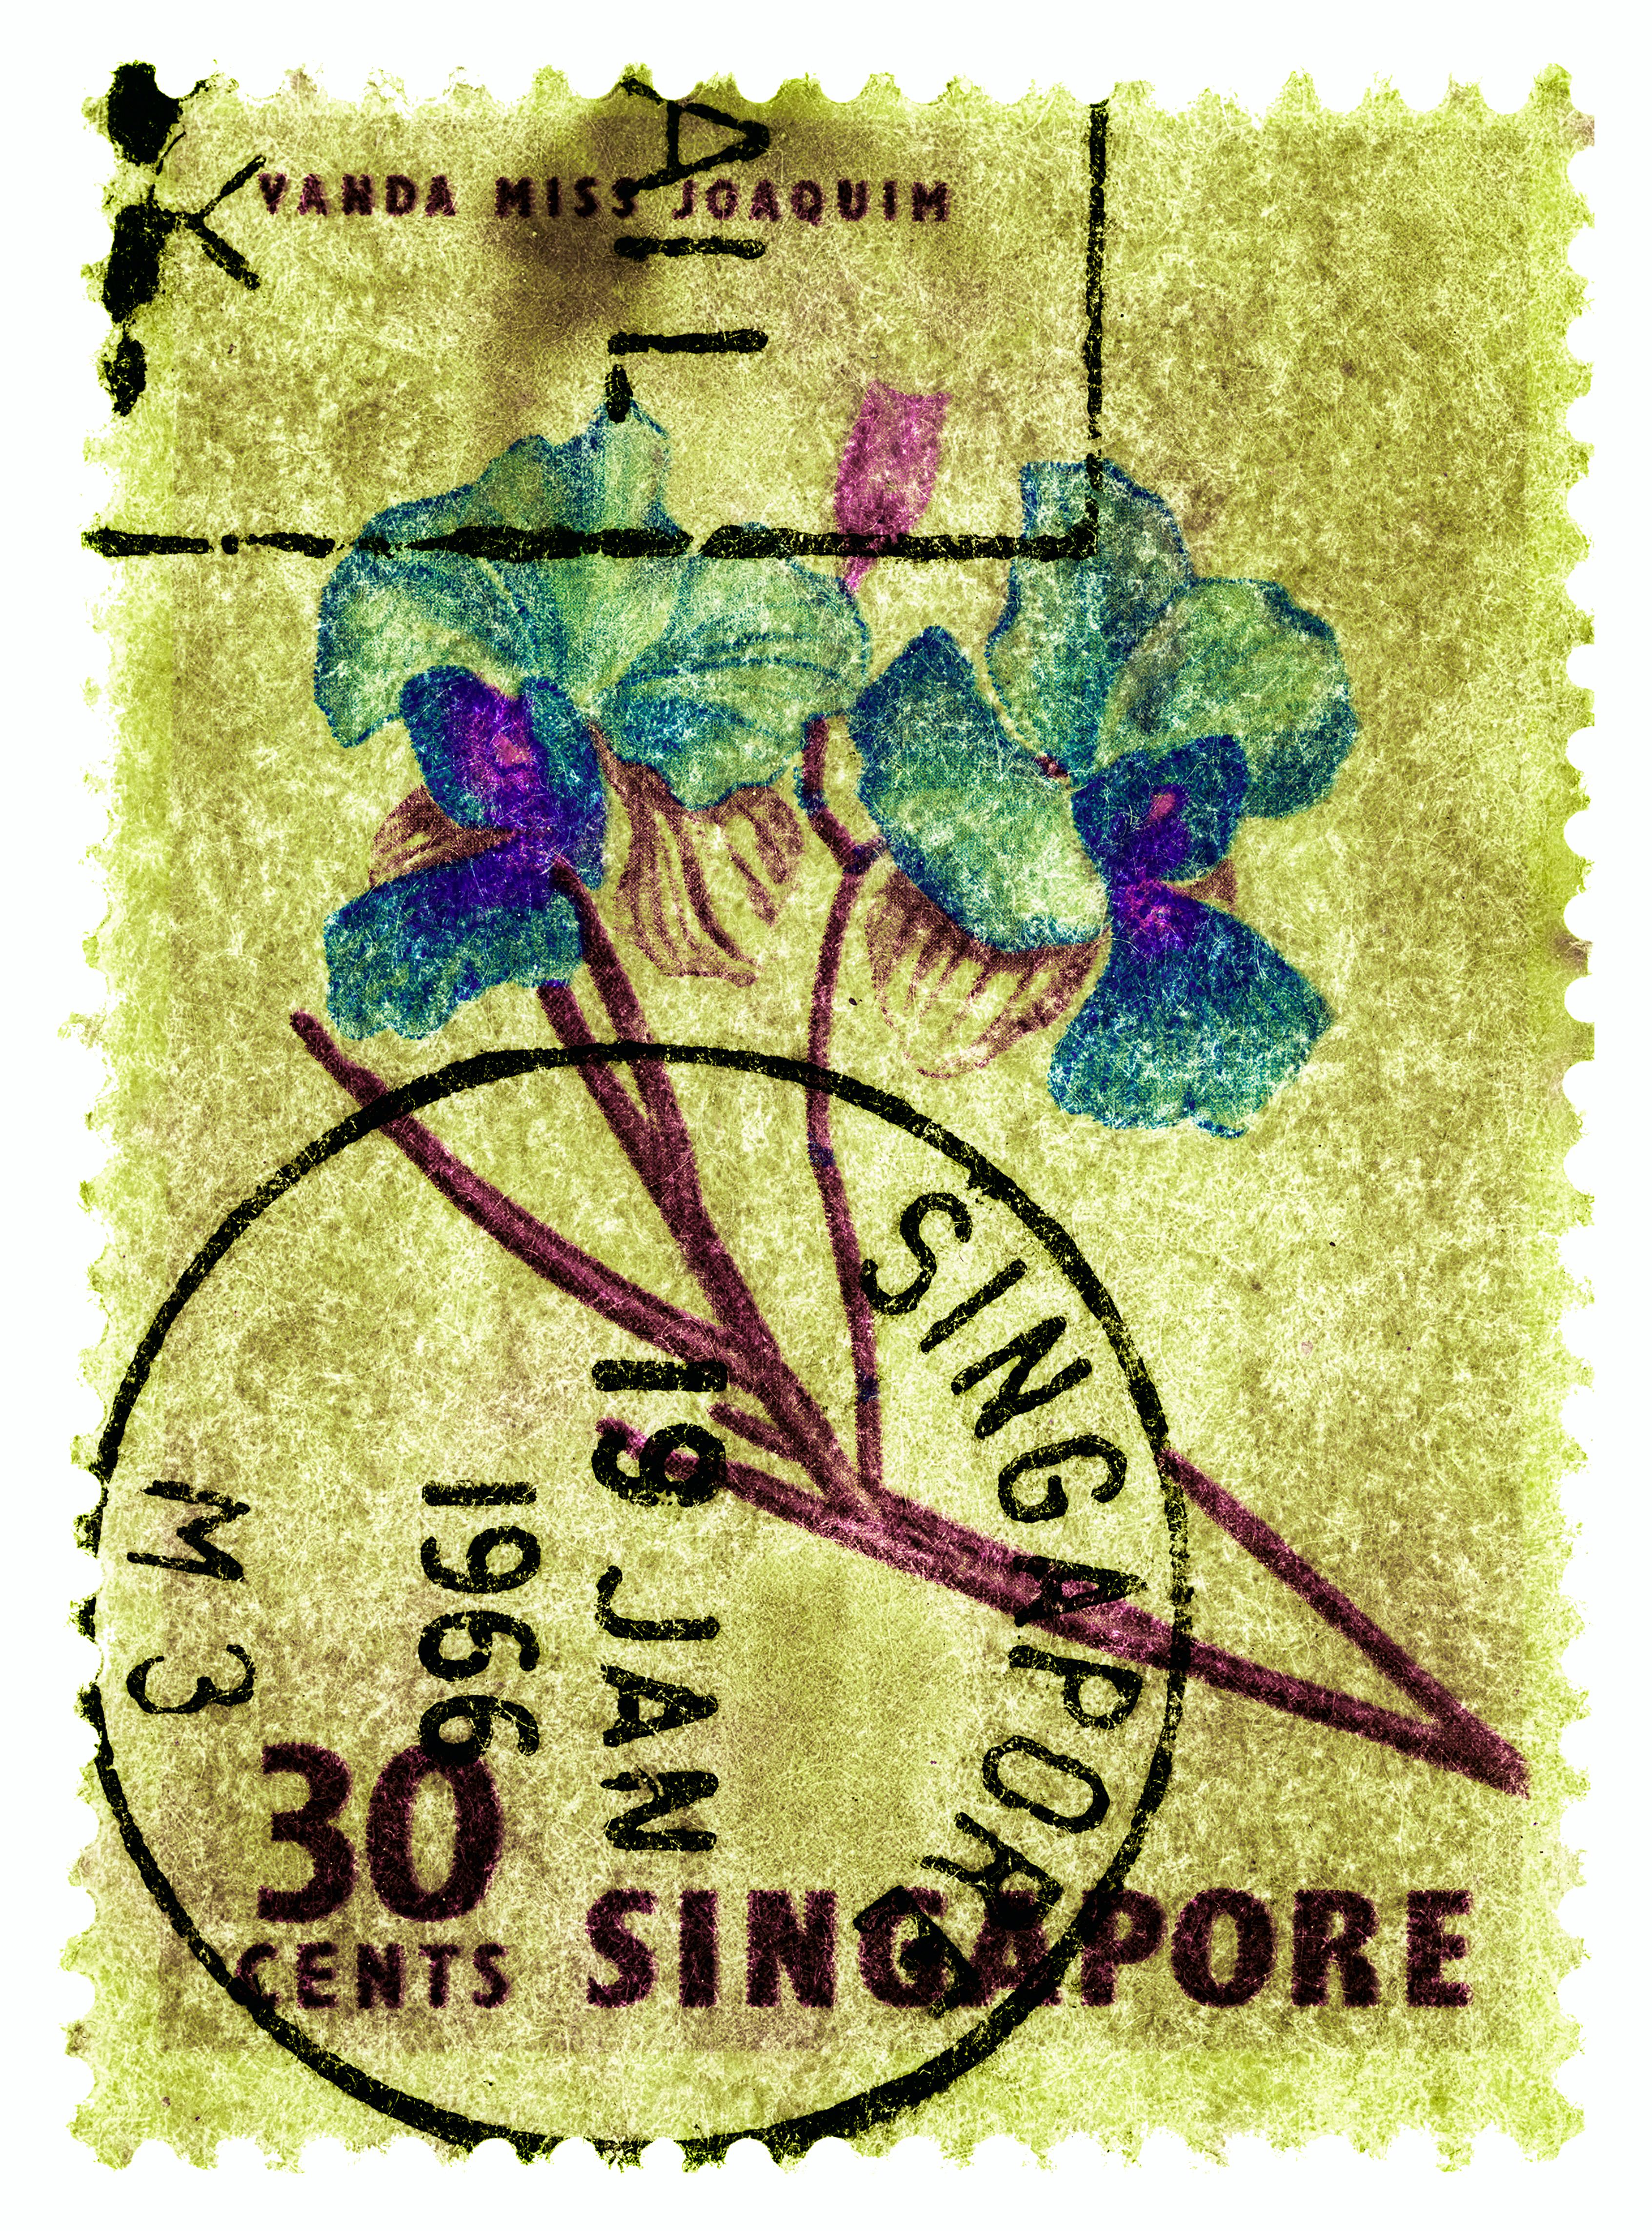 Heidler & Heeps Color Photograph - Singapore Stamp Collection, 30c Singapore Orchid Yellow - Floral color photo